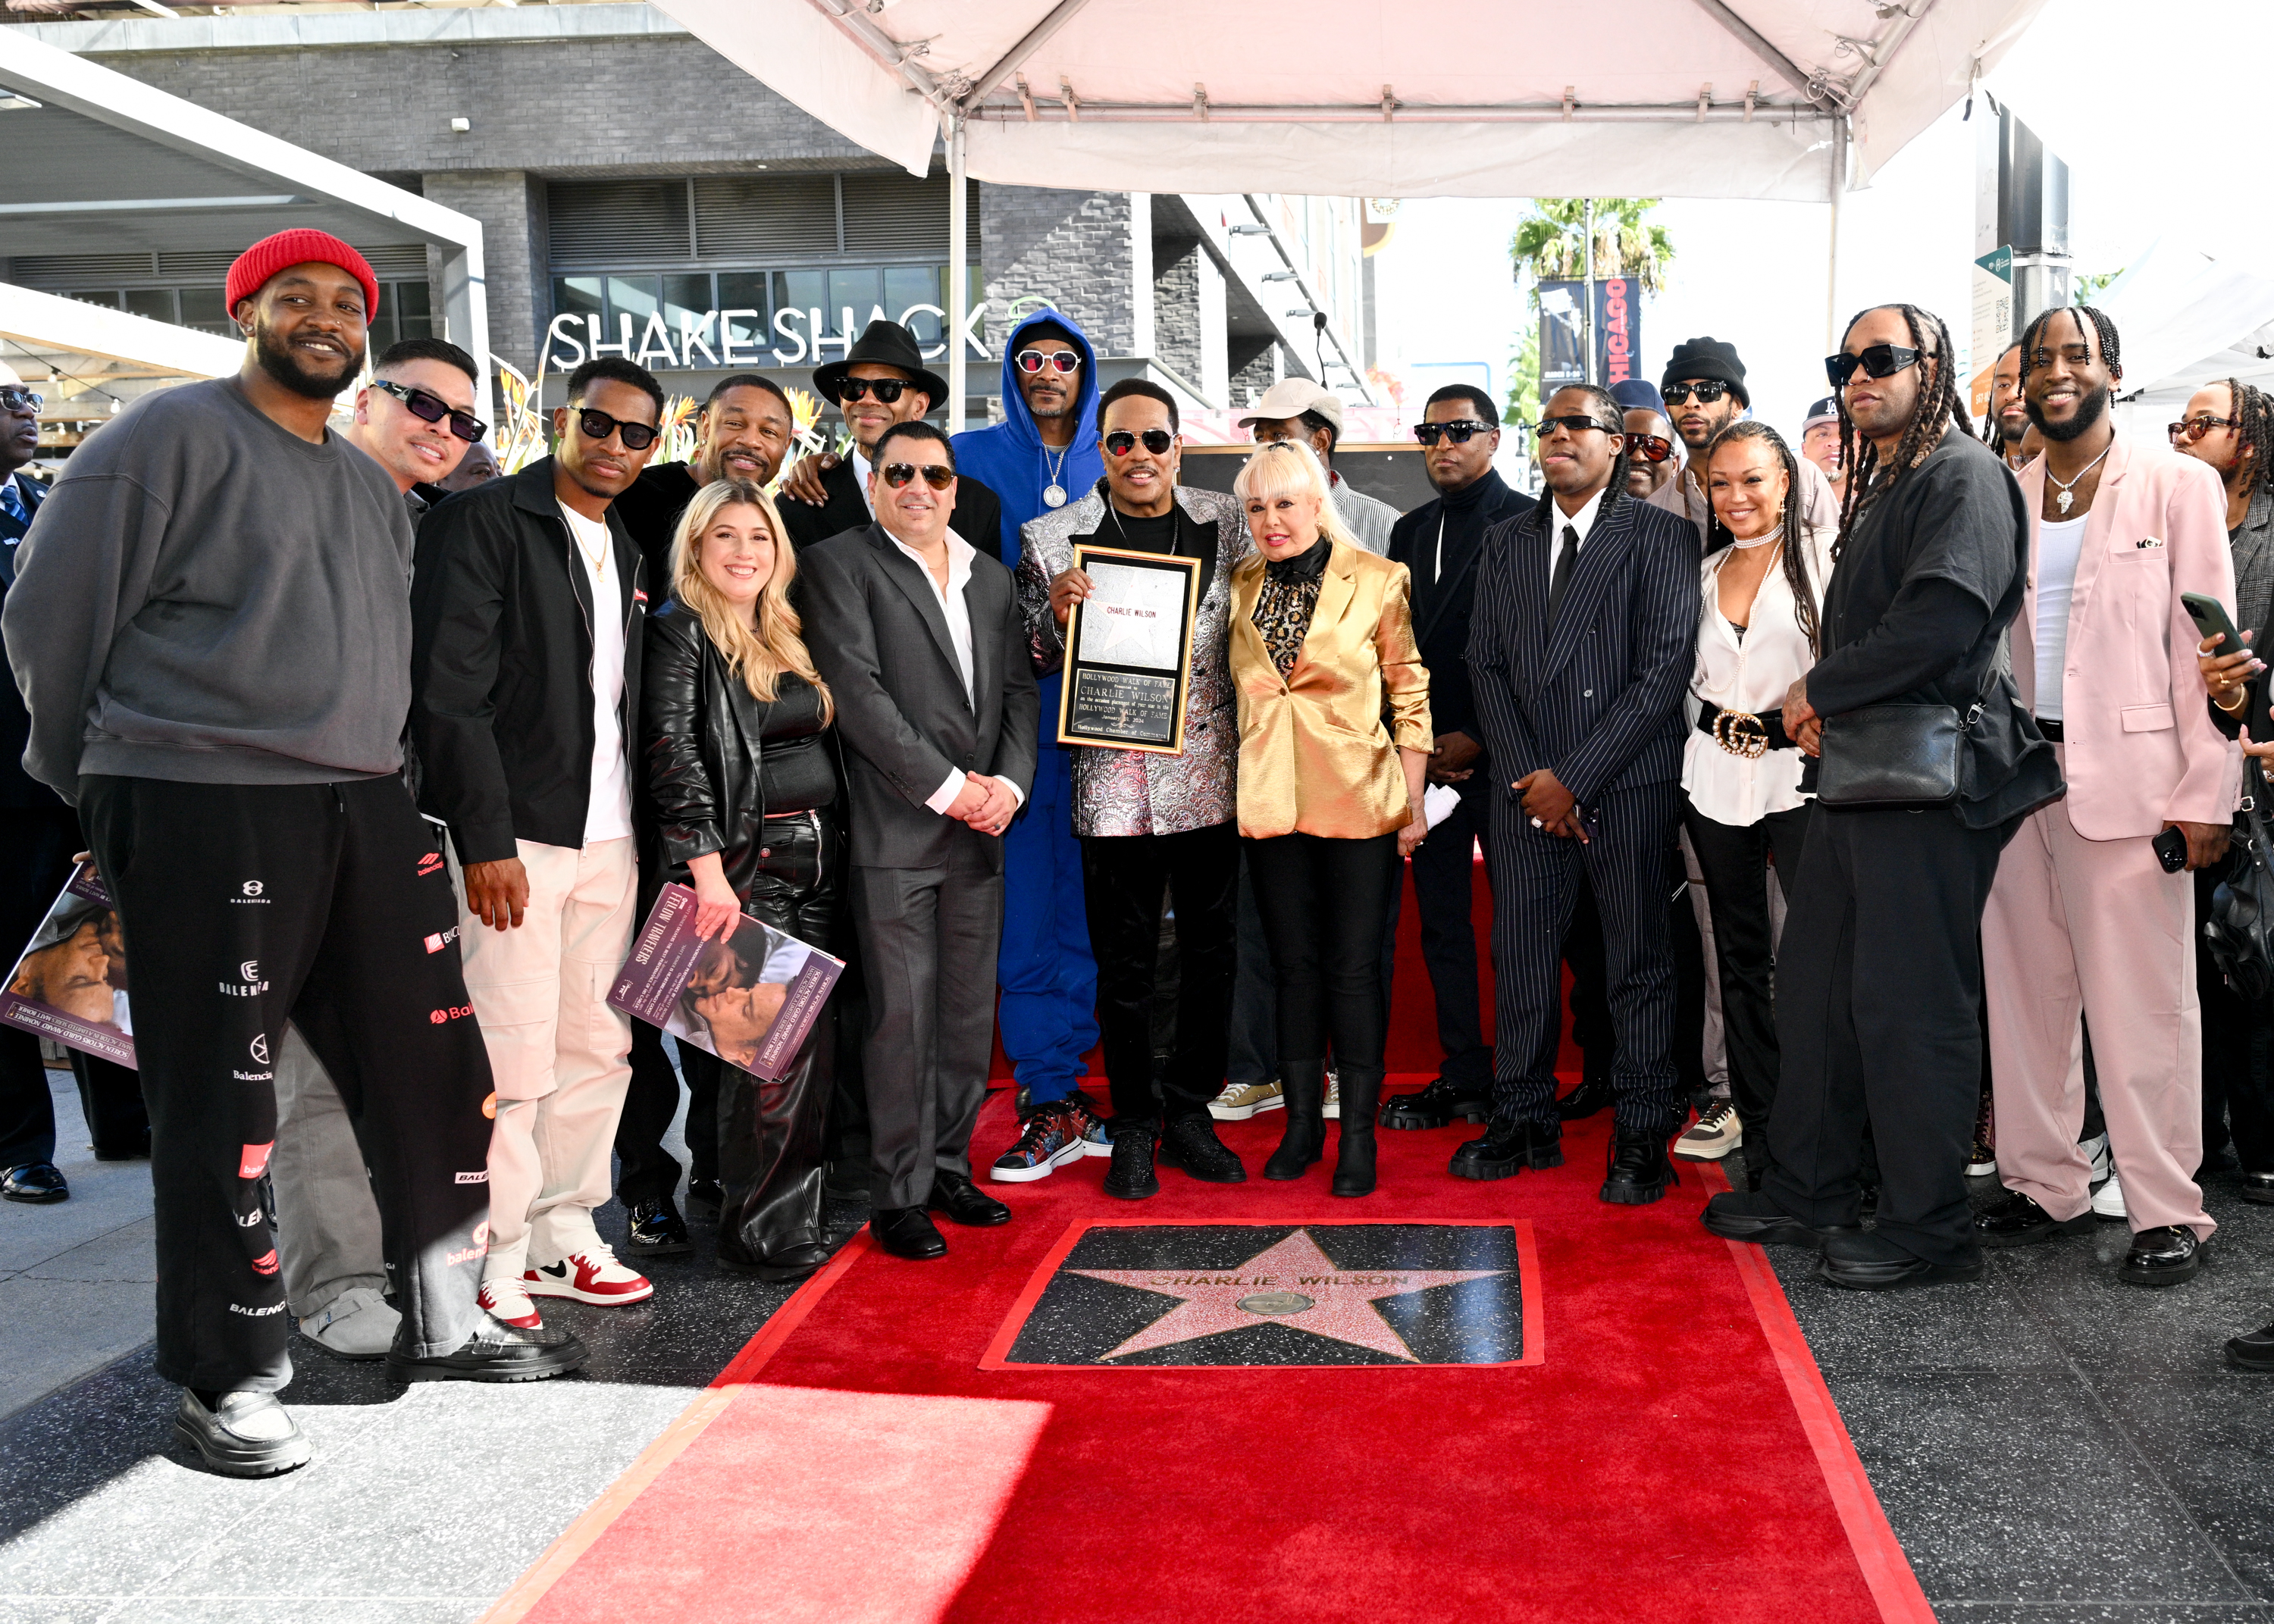 Charlie Wilson Celebrates His Birthday With A Star On The Hollywood Walk of Fame [VIDEO]